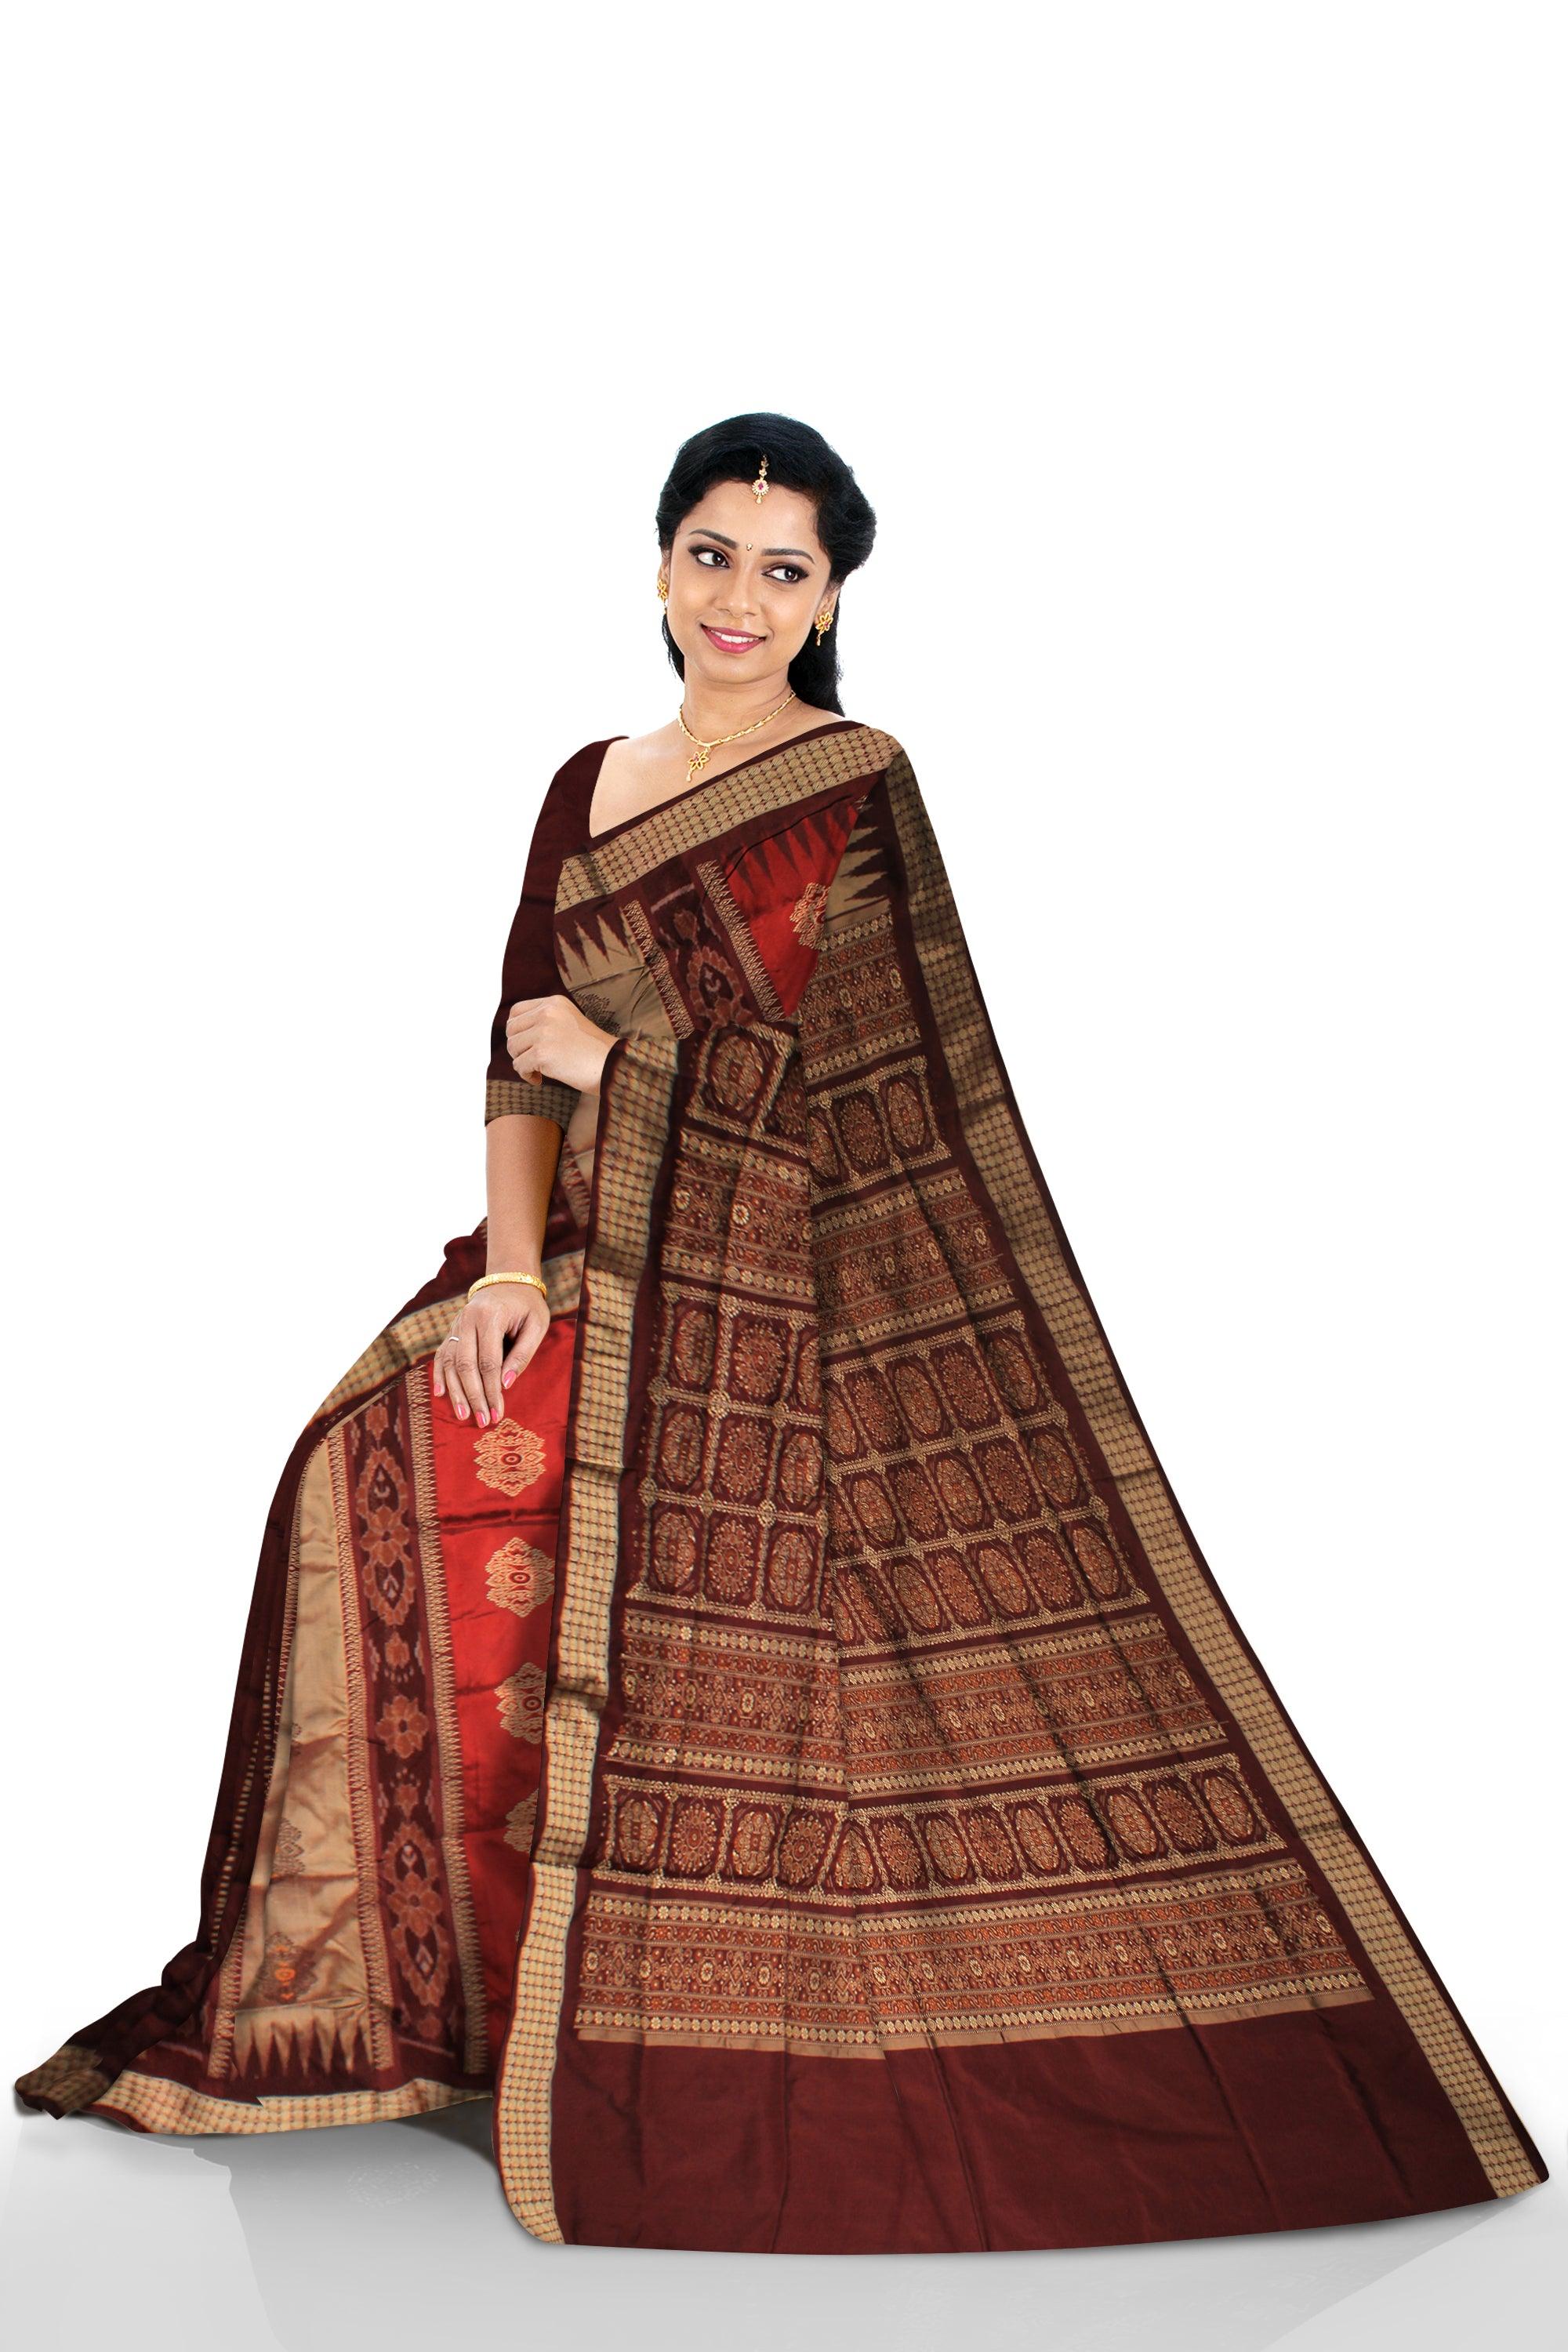 Full Body Boxes Pattern Pata Saree In Red And Maroon Color., Party